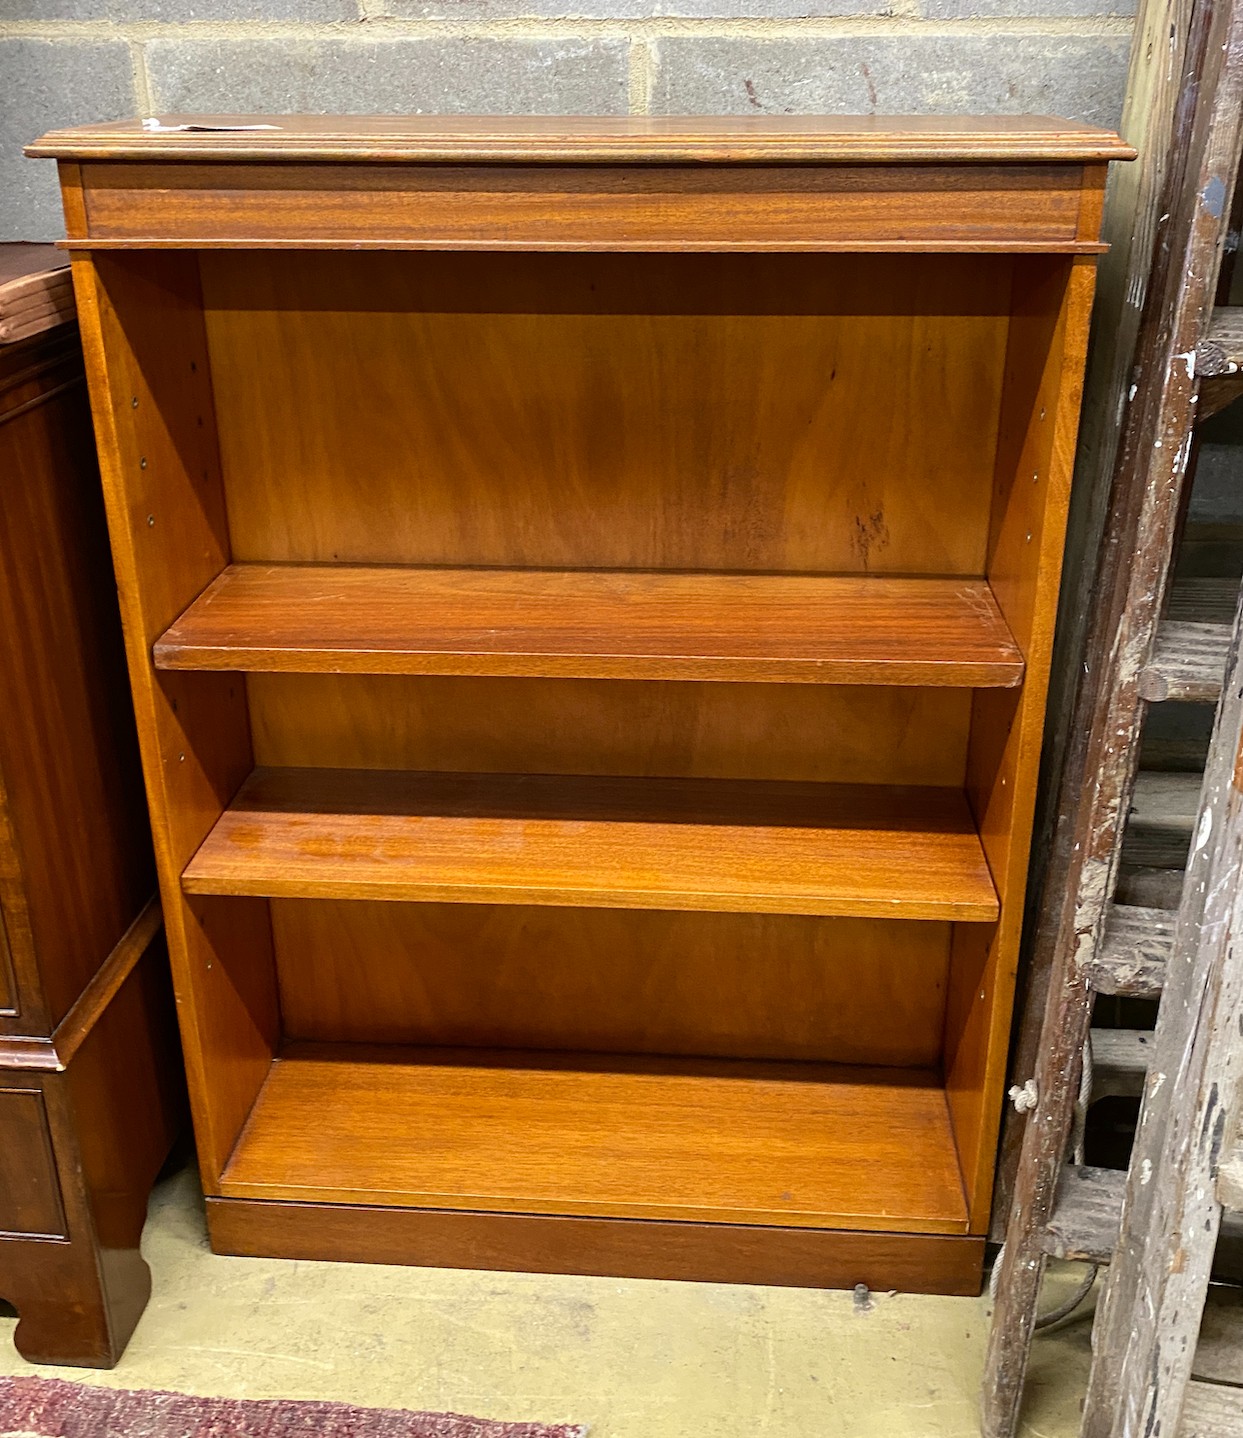 A reproduction Edwardian style mahogany open bookcase, width 79cm, depth 26cm, height 107cm